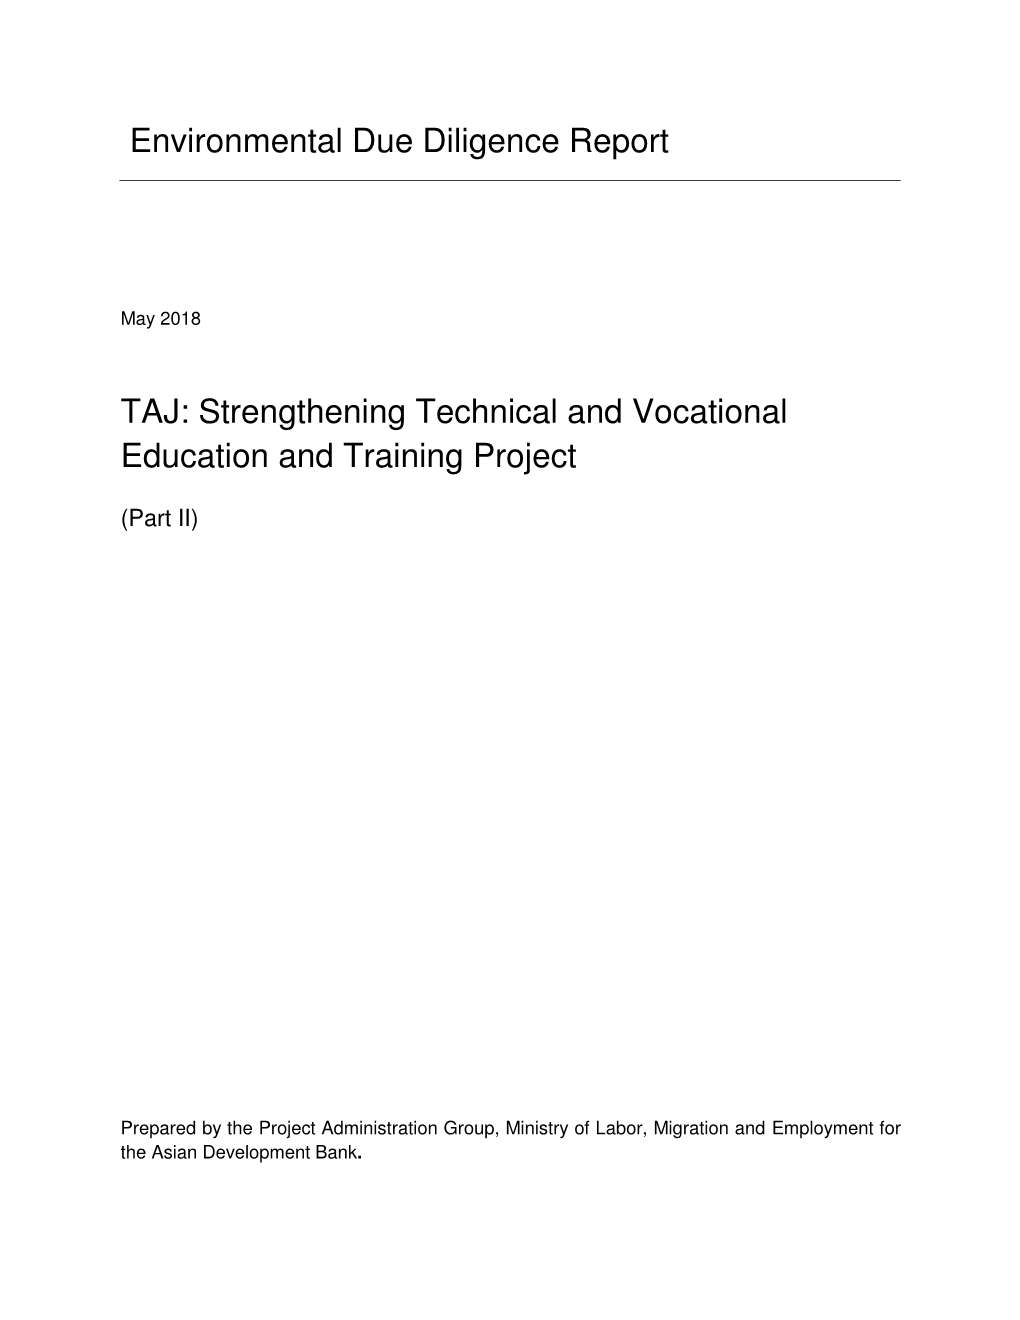 Strengthening Technical and Vocational Education and Training Project